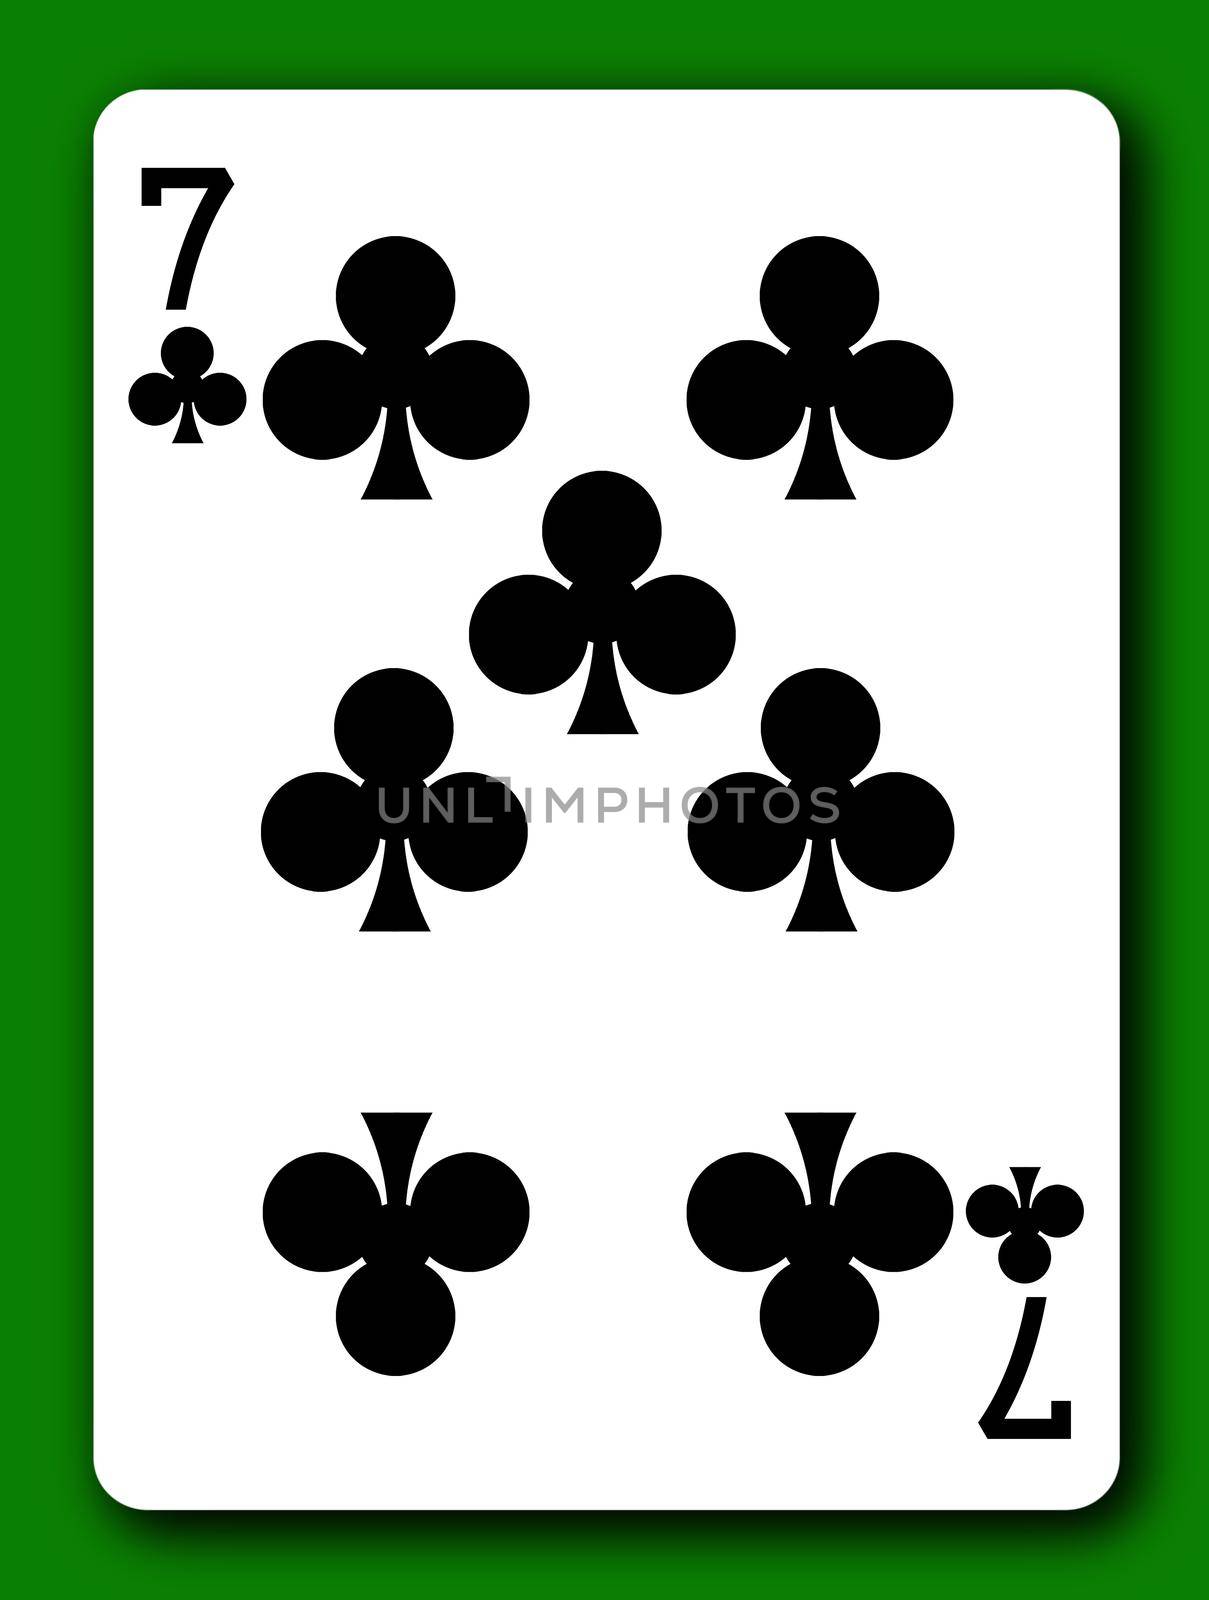 A 7 Seven of Clubs playing card with clipping path to remove background and shadow 3d illustration